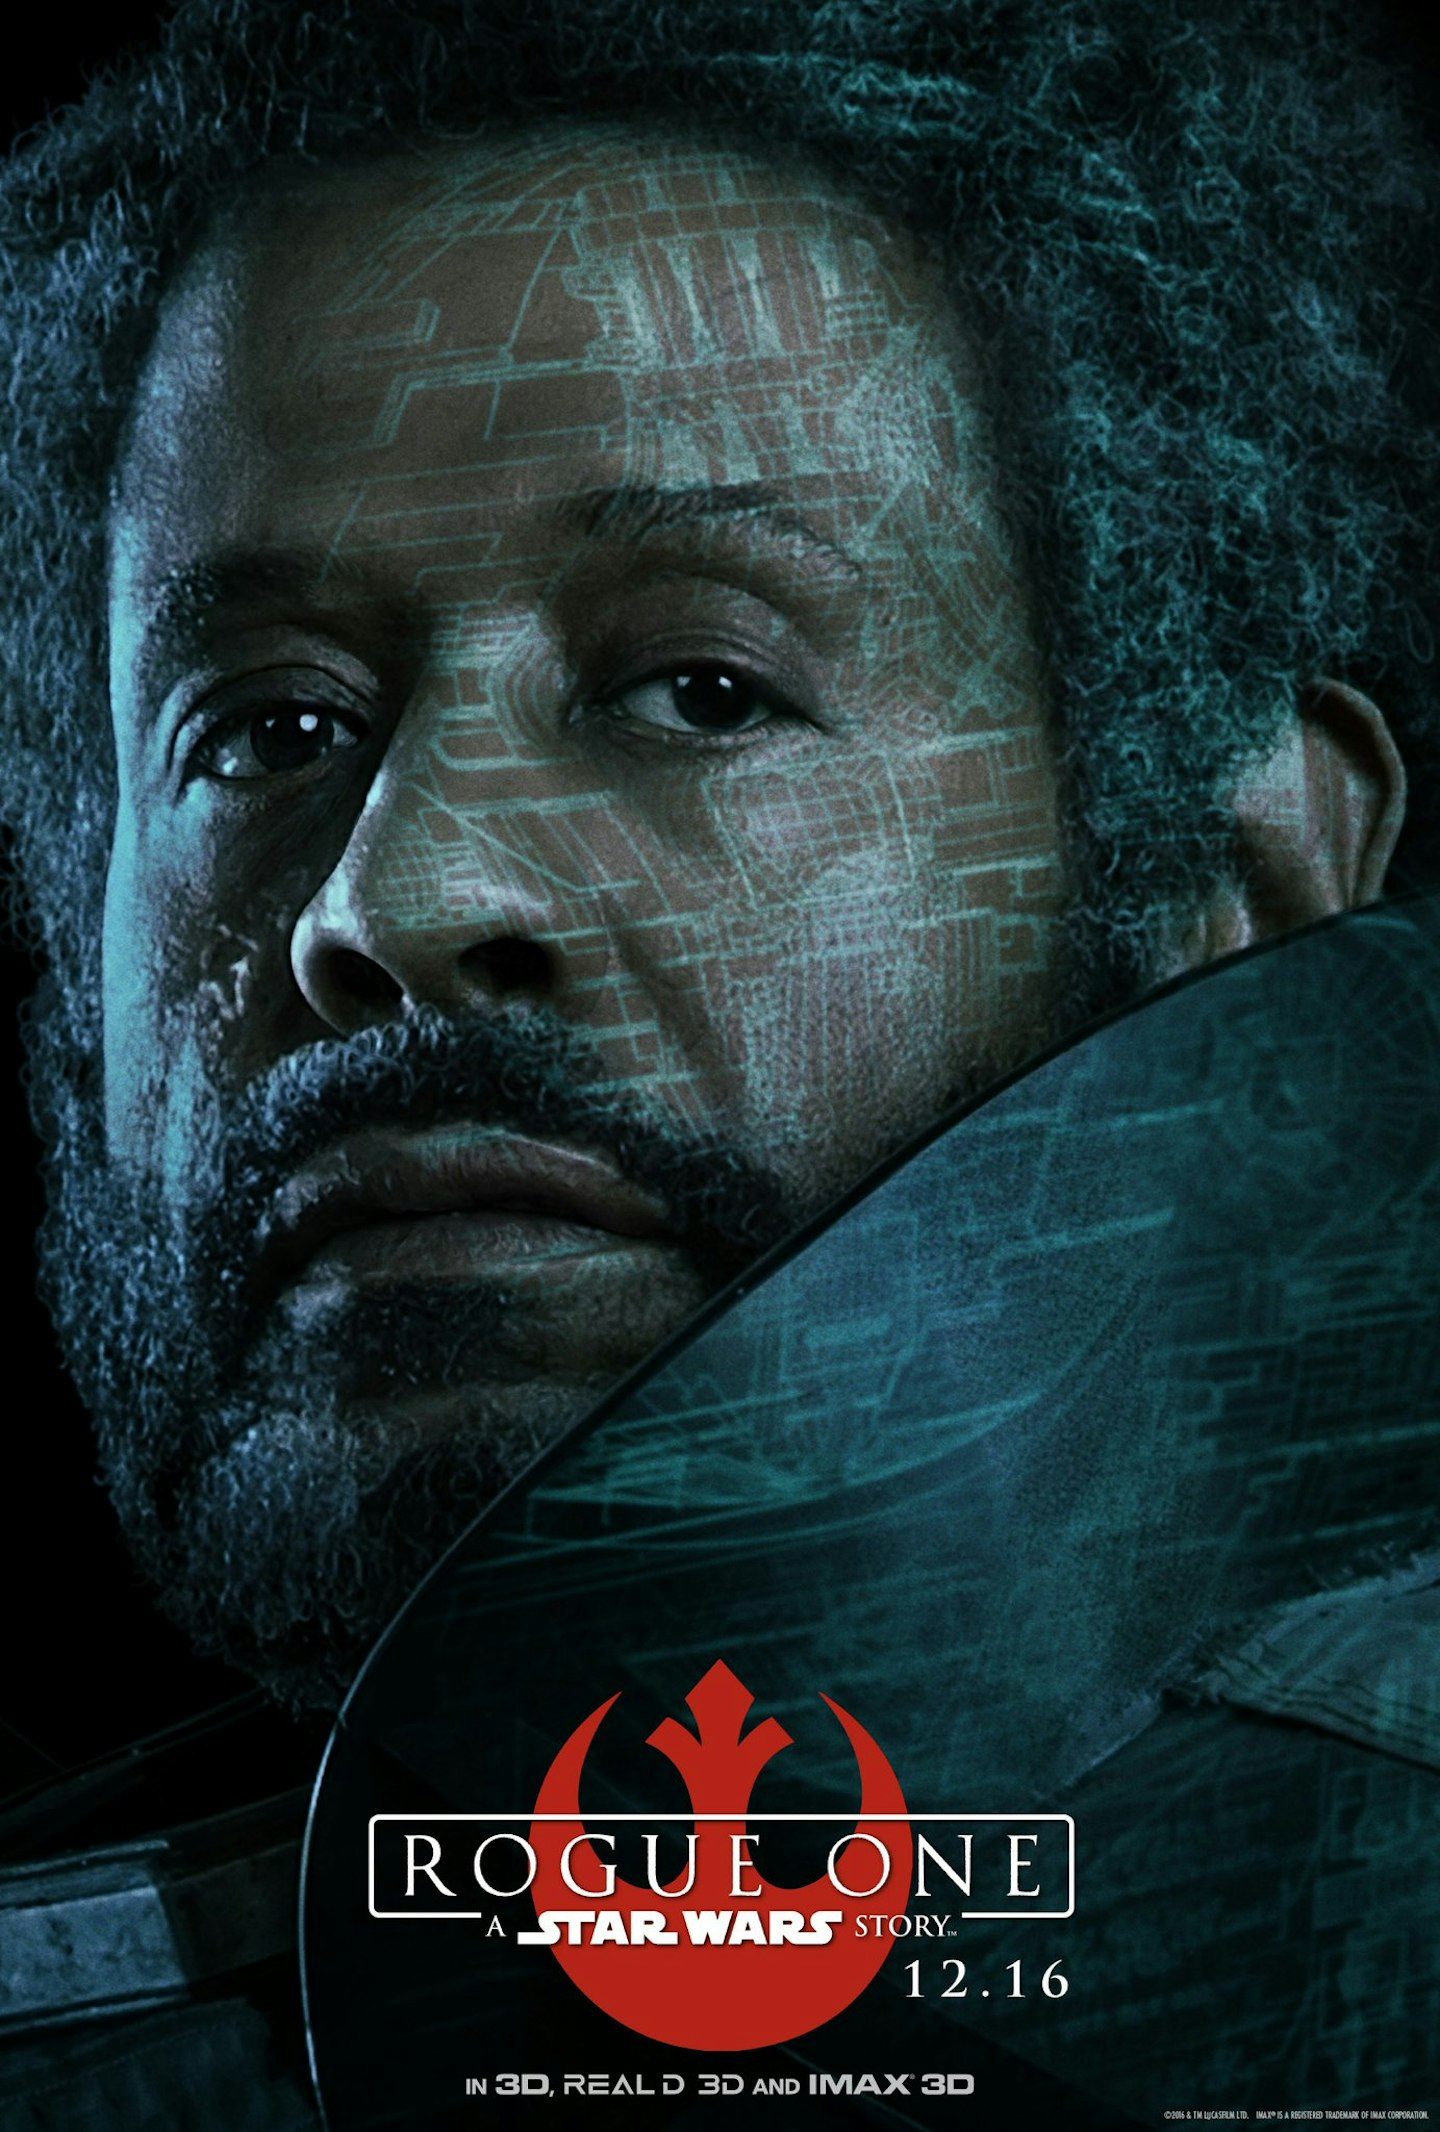 Rogue One character posters